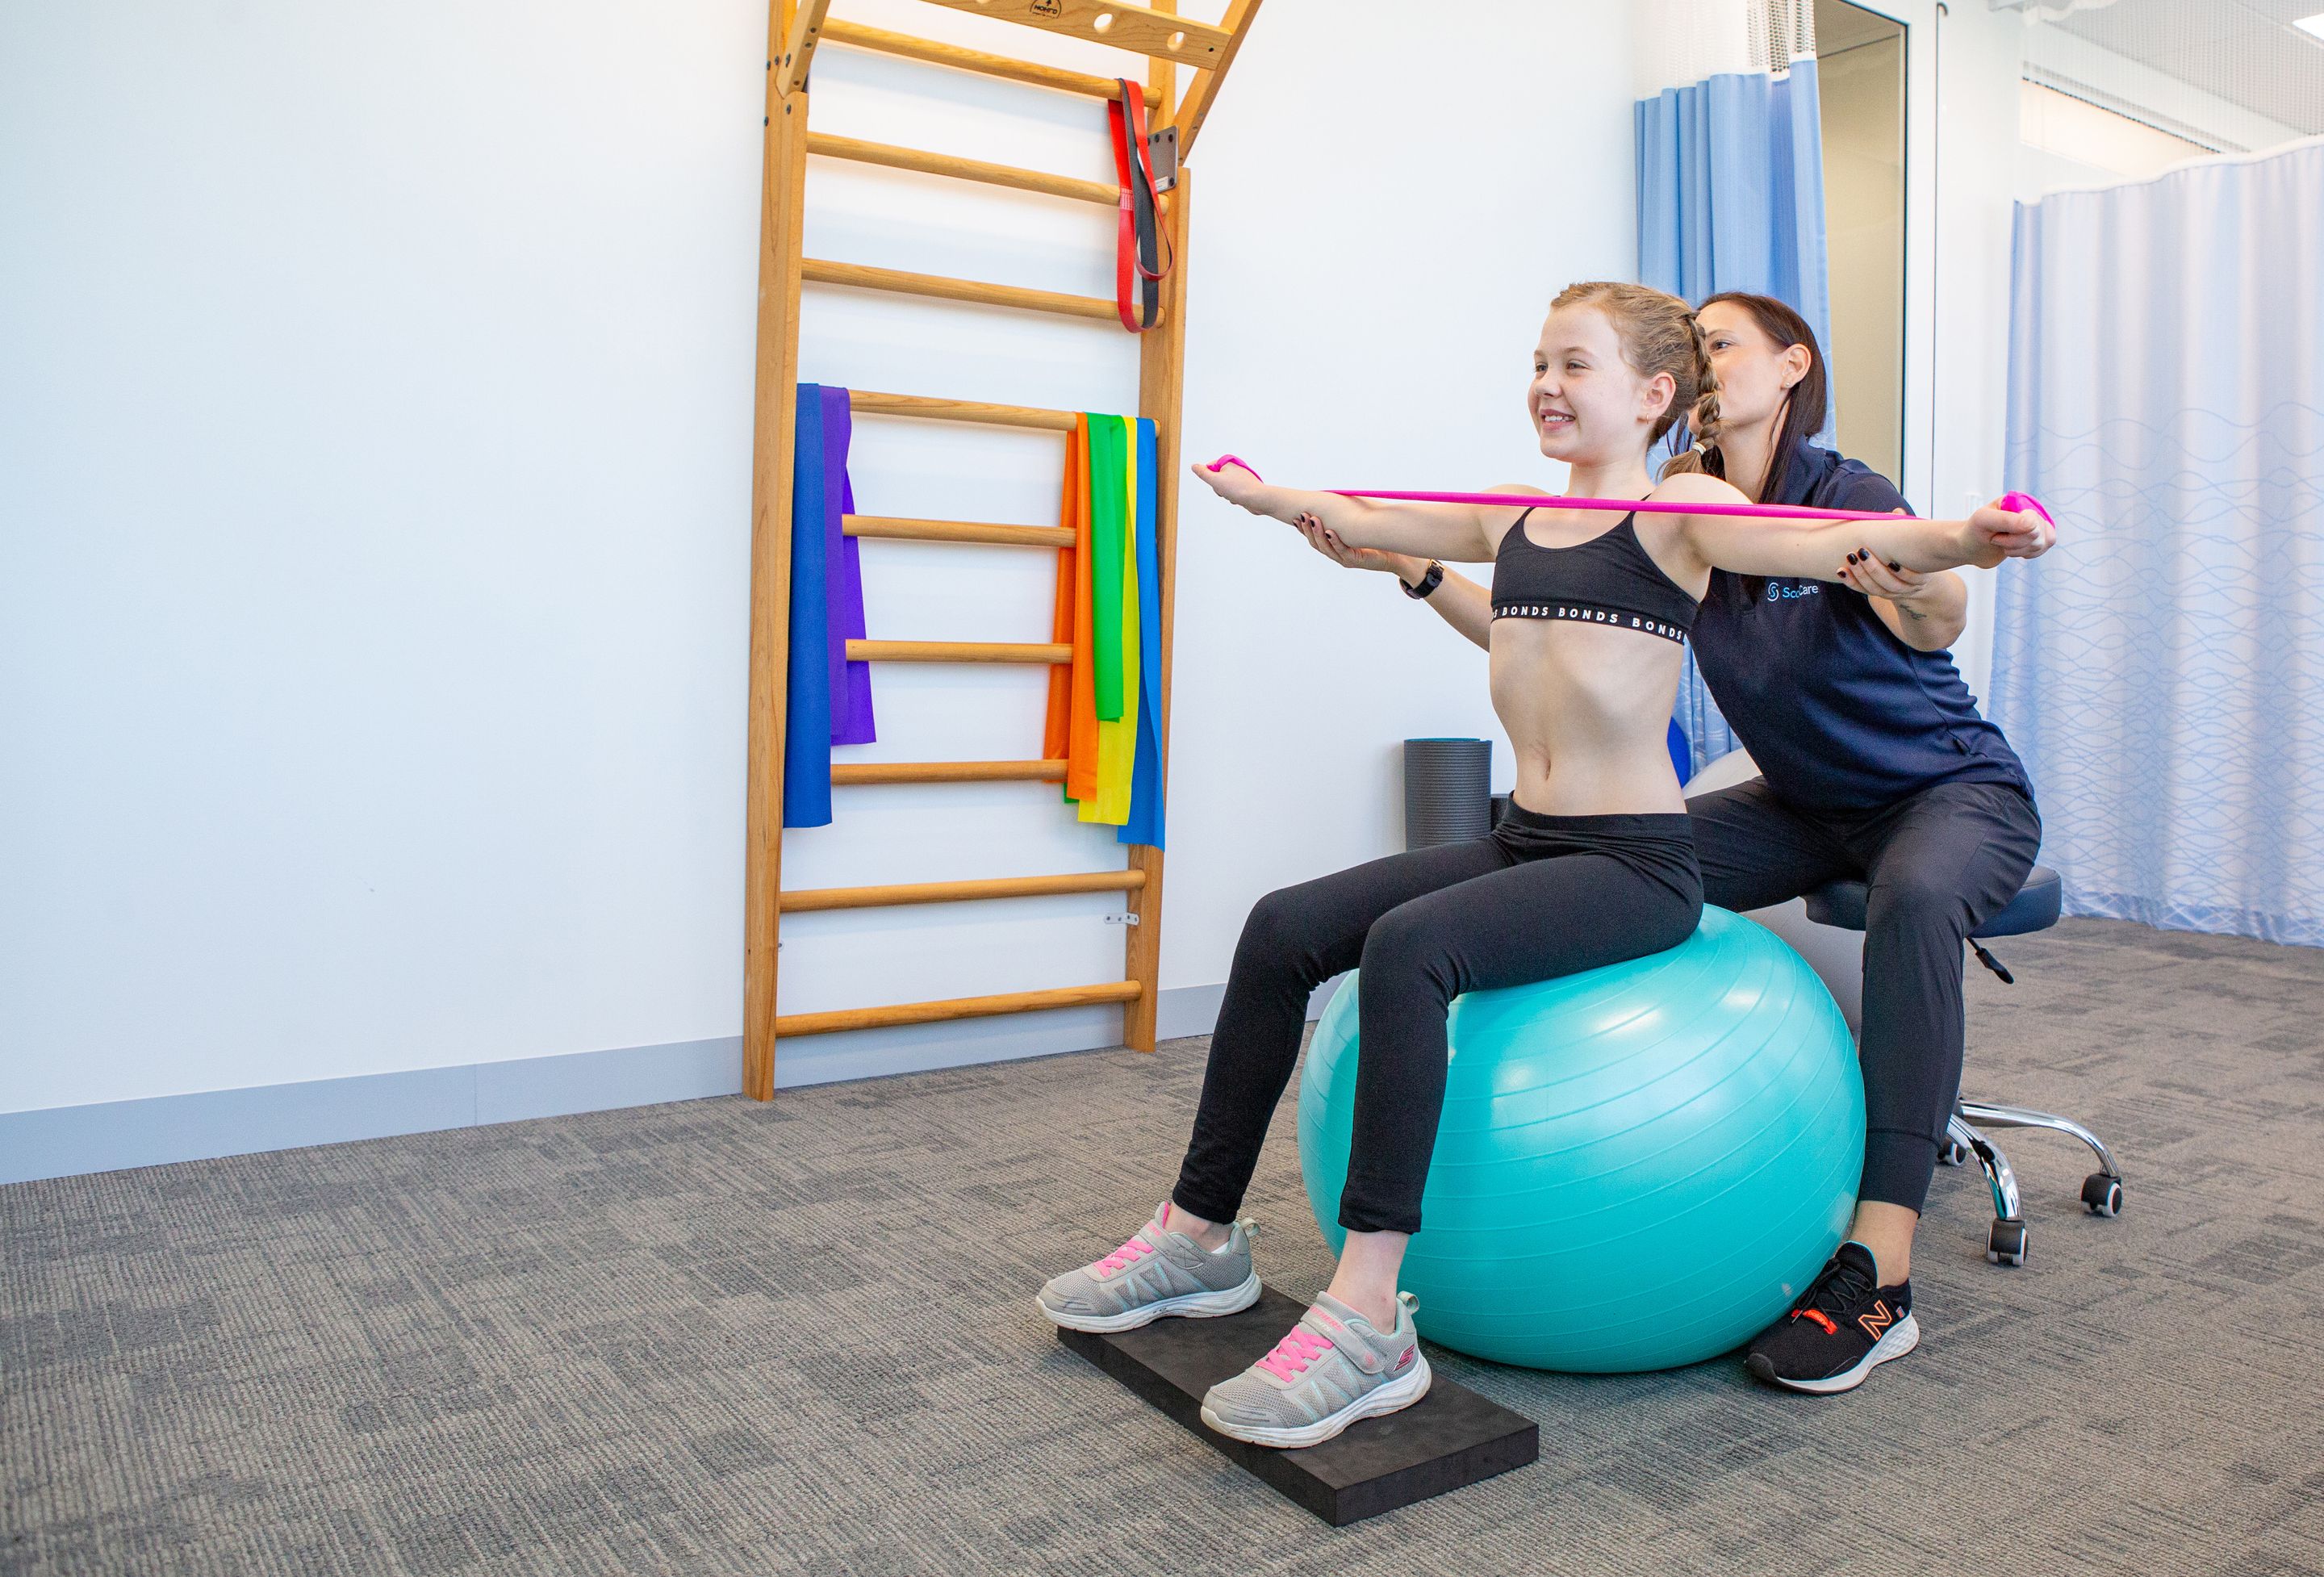 ScoliBalance image of physiotherapist helping young patient perform exercise